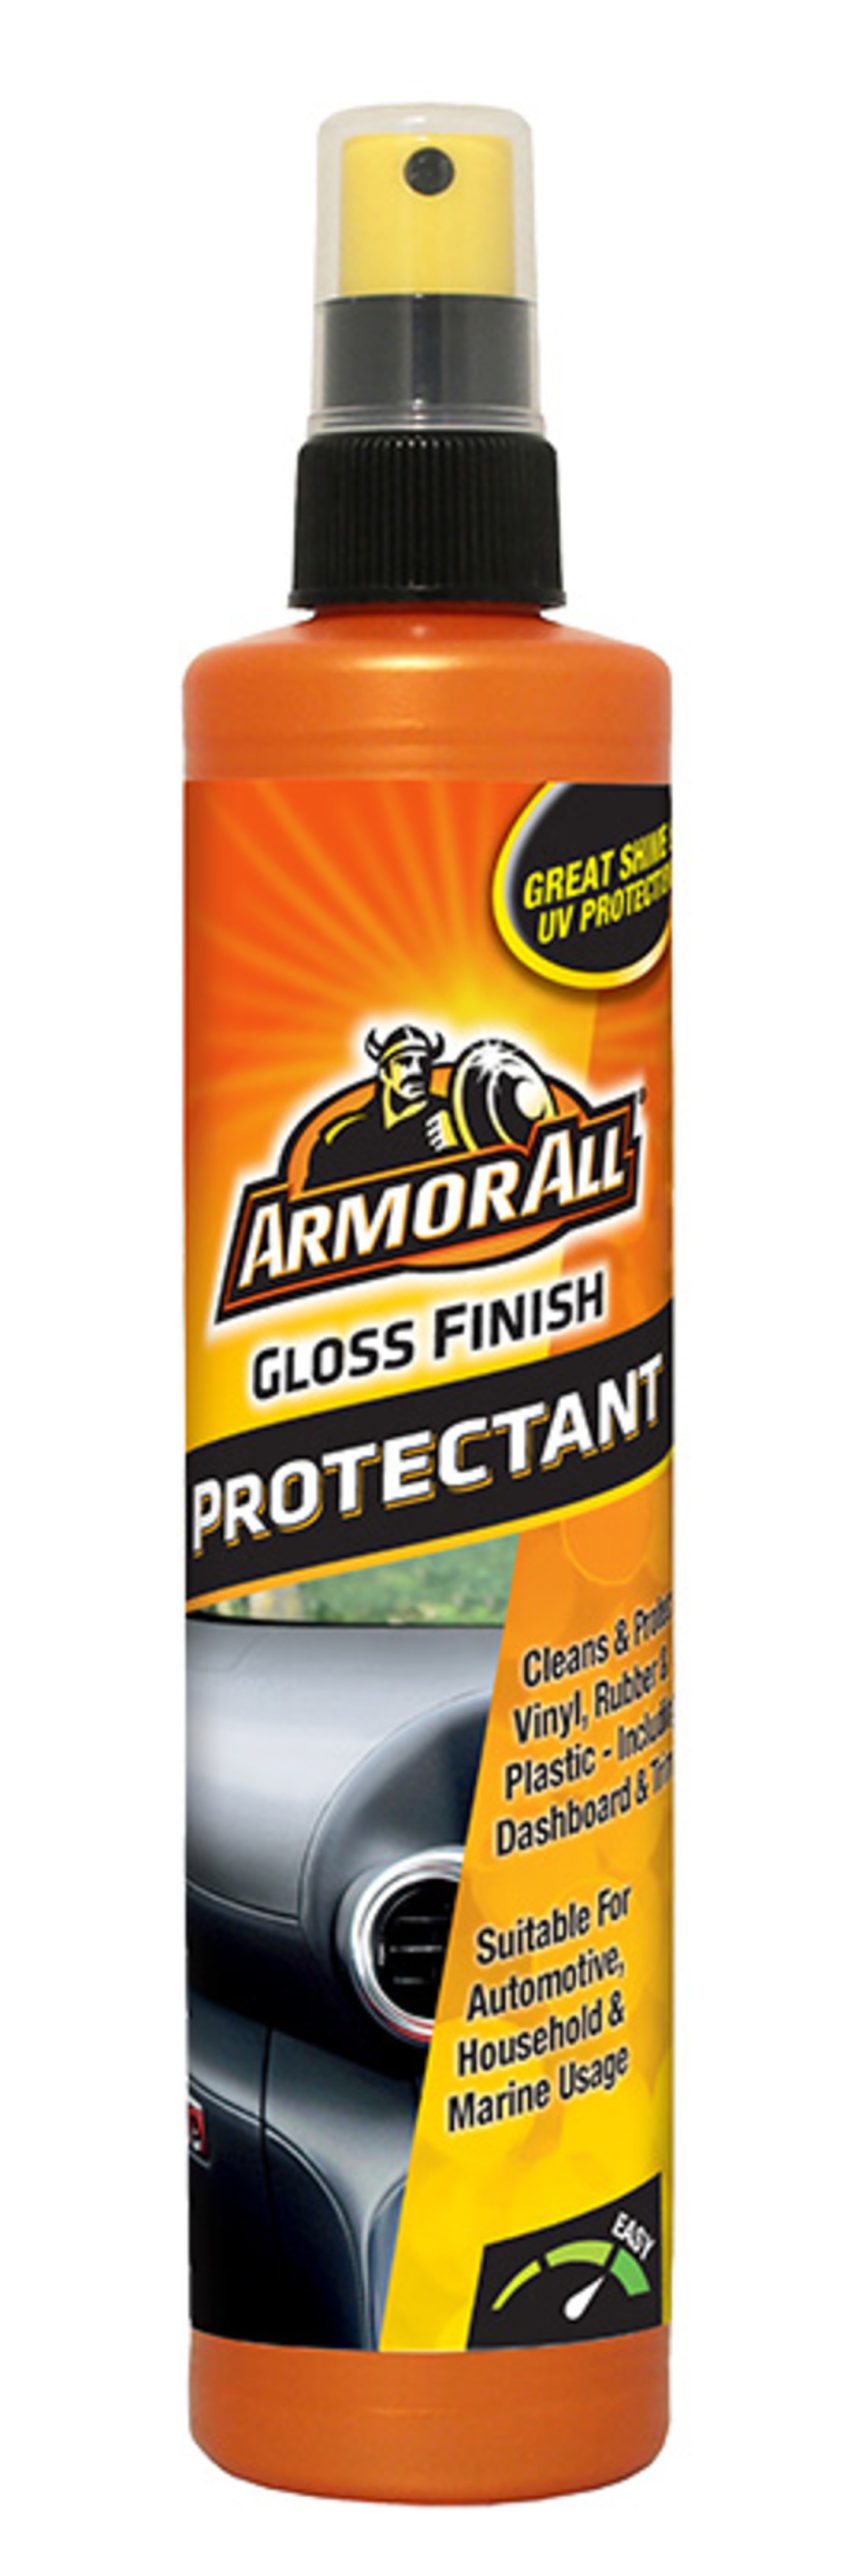 armor all launches new extreme shield + ceramic series for car care